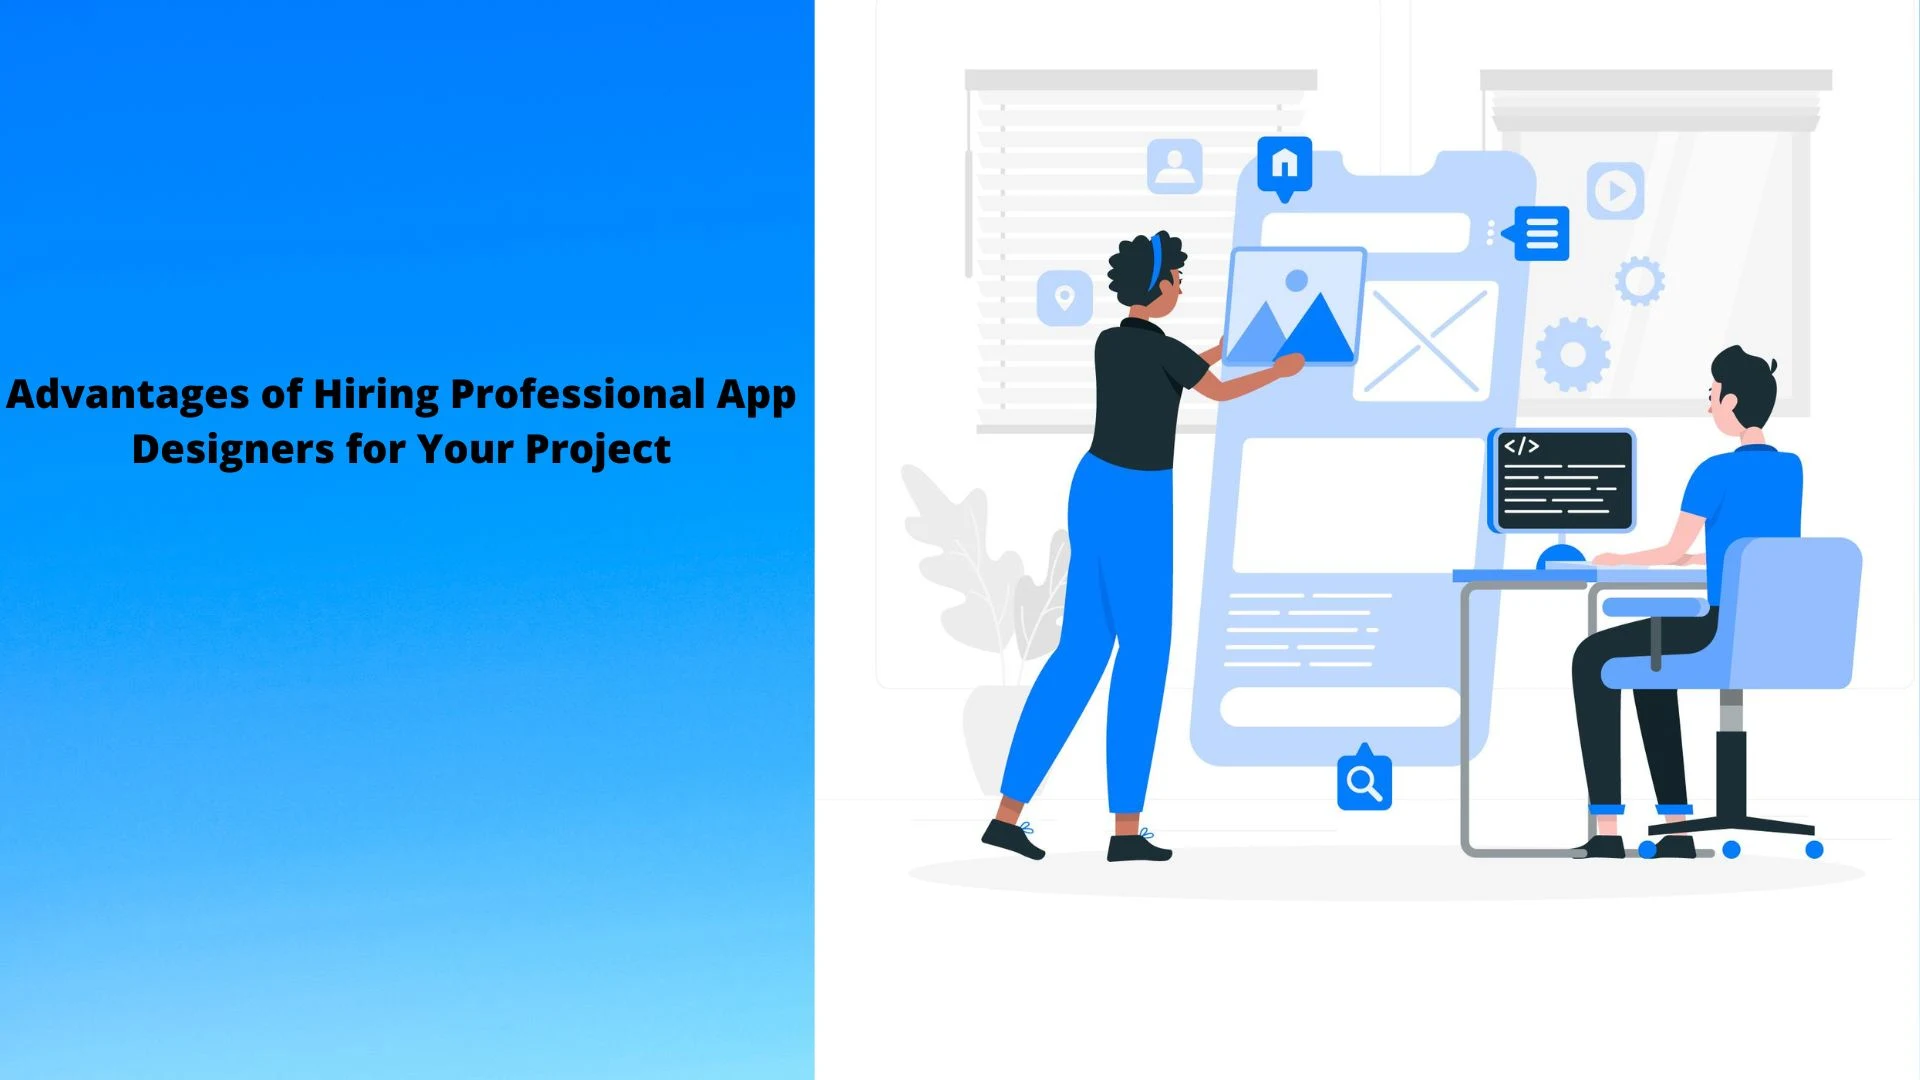 Advantages of Hiring Professional App Designers for Your Project